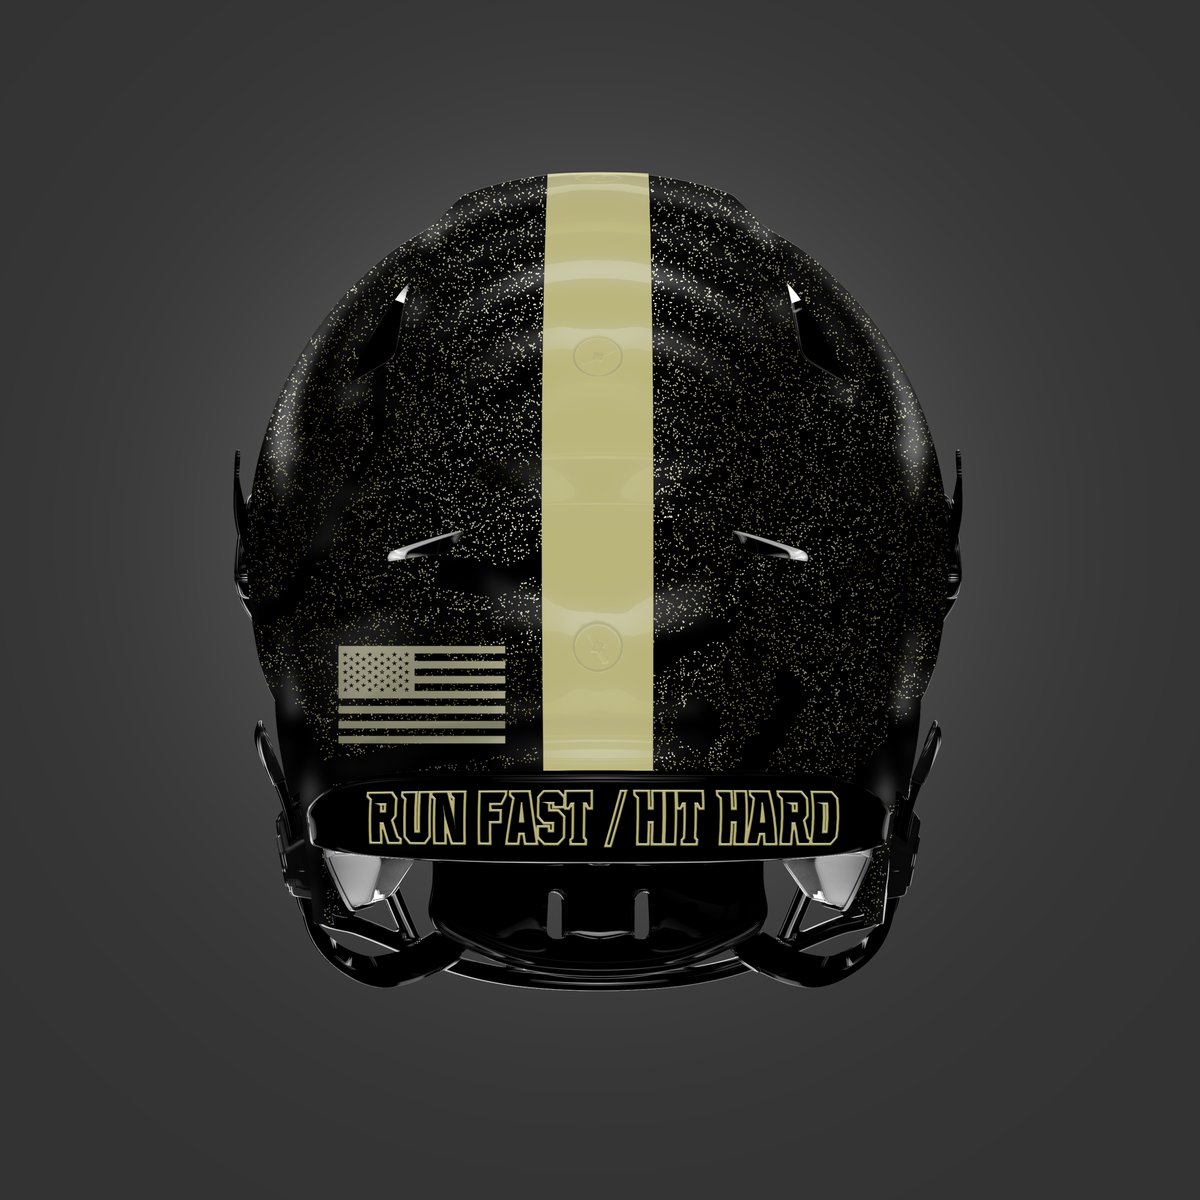 New look #⃣2⃣7⃣ for the '24 season; the Lee's Summit Tigers! A clean, classic design elevated with the details. Gold chrome decals, gold flake on the shells, and chrome bumper decals and US flags. Big thanks to new HC Todd Miller and the Tigers for choosing @417helmets!